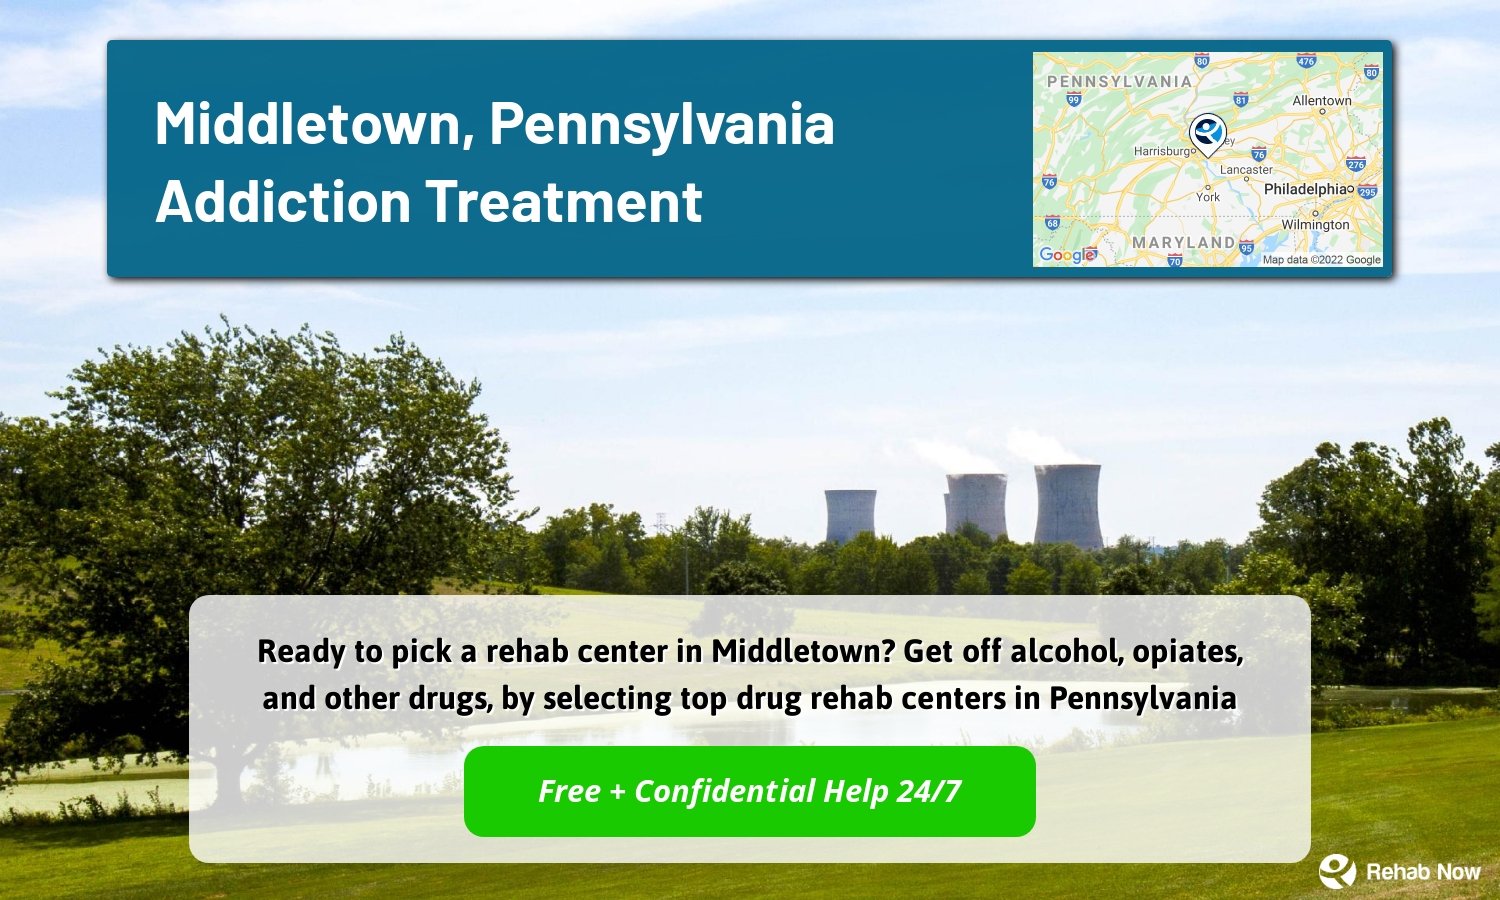 Ready to pick a rehab center in Middletown? Get off alcohol, opiates, and other drugs, by selecting top drug rehab centers in Pennsylvania